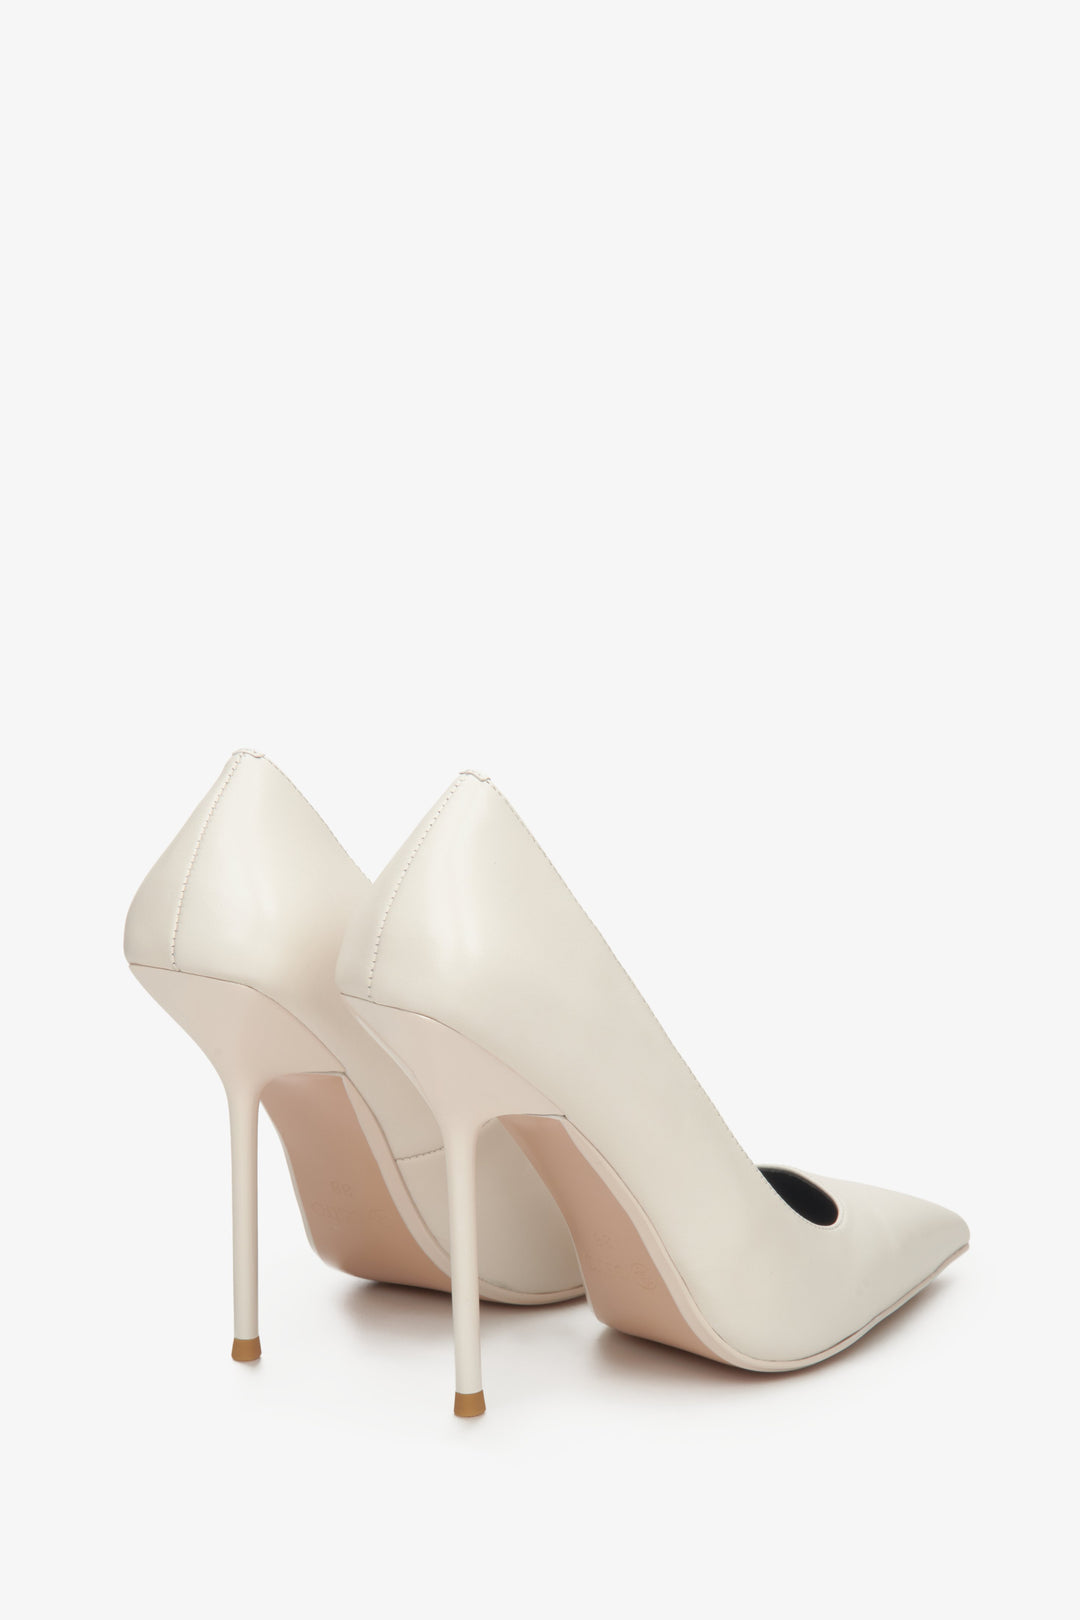 Estro's women's white high-heeled pumps - close-up on the shoe's heel.